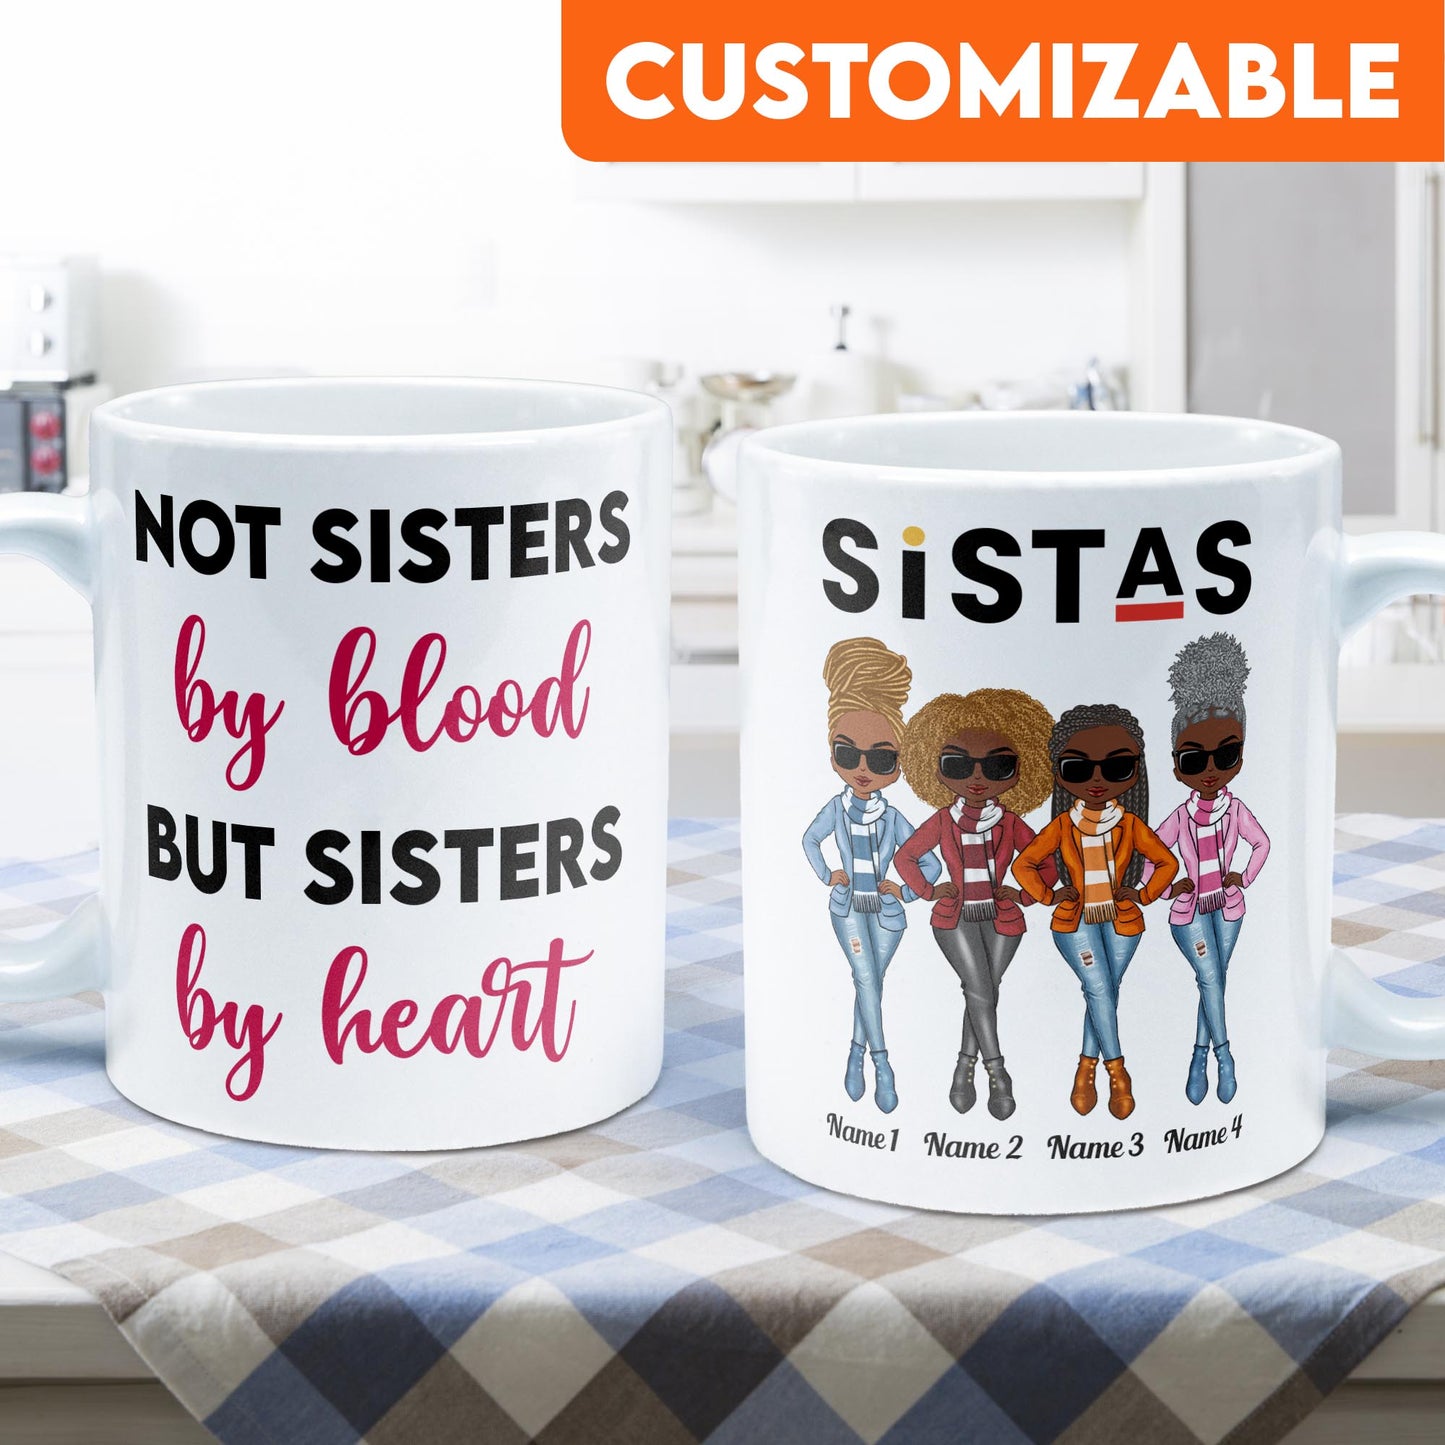 Sistas Not Sisters By Blood But Sisters By Heart - Personalized Mug - Birthday & Christmas Gift For Sista, Sister, Soul Sister, Best Friend, BFF, Bestie, Friend